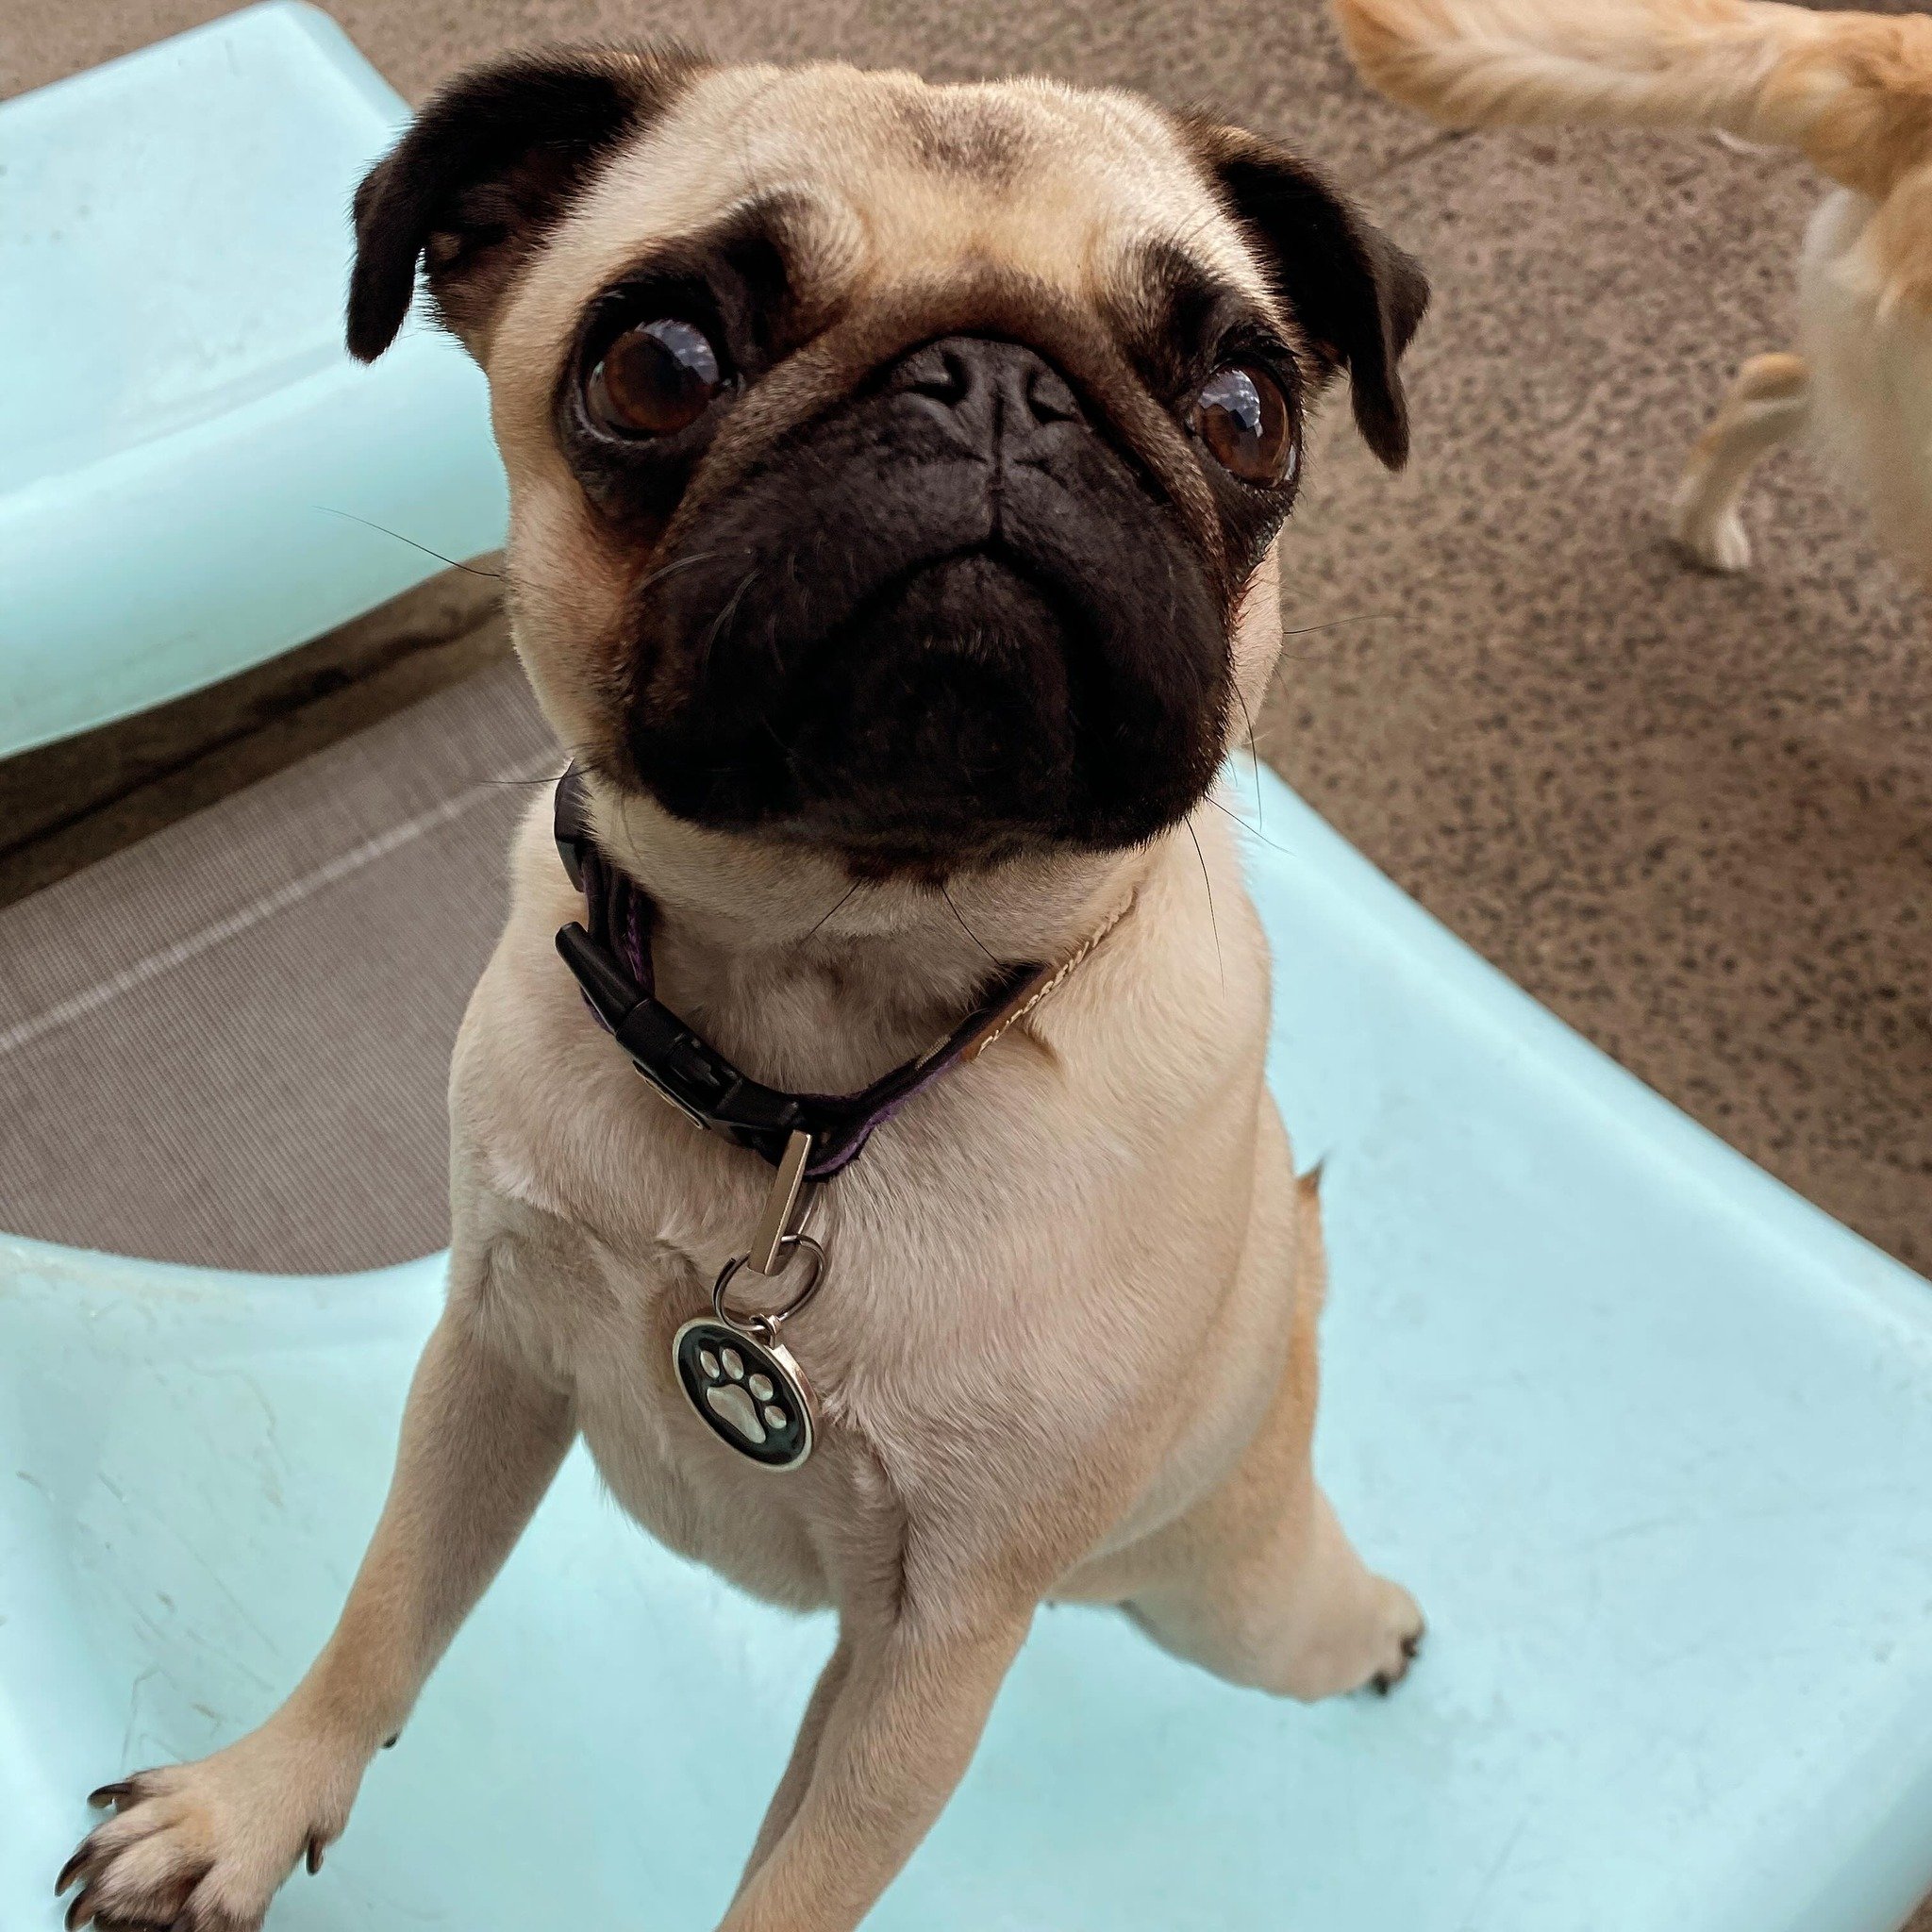 One little girl is happy to be back at school .. Miss Lola 🌸🥰
.
.
#lola #pug #puglove #instagrampugs #pugsofinstagram #pugpuppy #daycare #doggydaycare #furfamily #family #dogs #doglovers #puppylove #lovedogs #dogcare #wecare #playtime #dogsplay